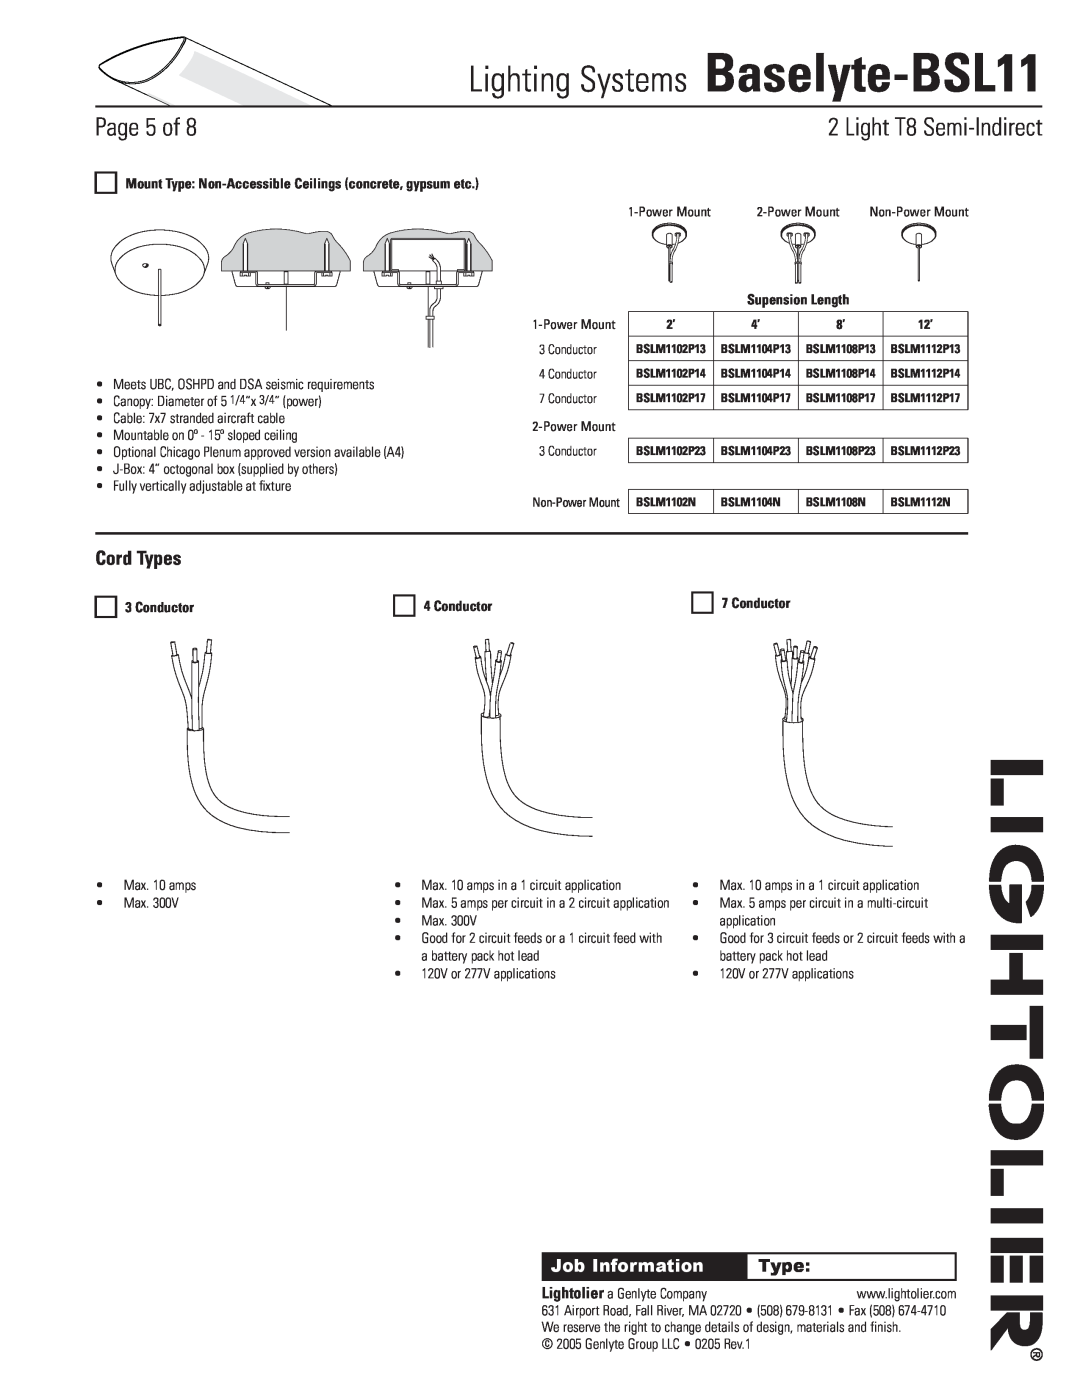 Lightolier Cord Types, Conductor, Lighting Systems Baselyte-BSL11, Page of, Light T8 Semi-Indirect, Job Information 